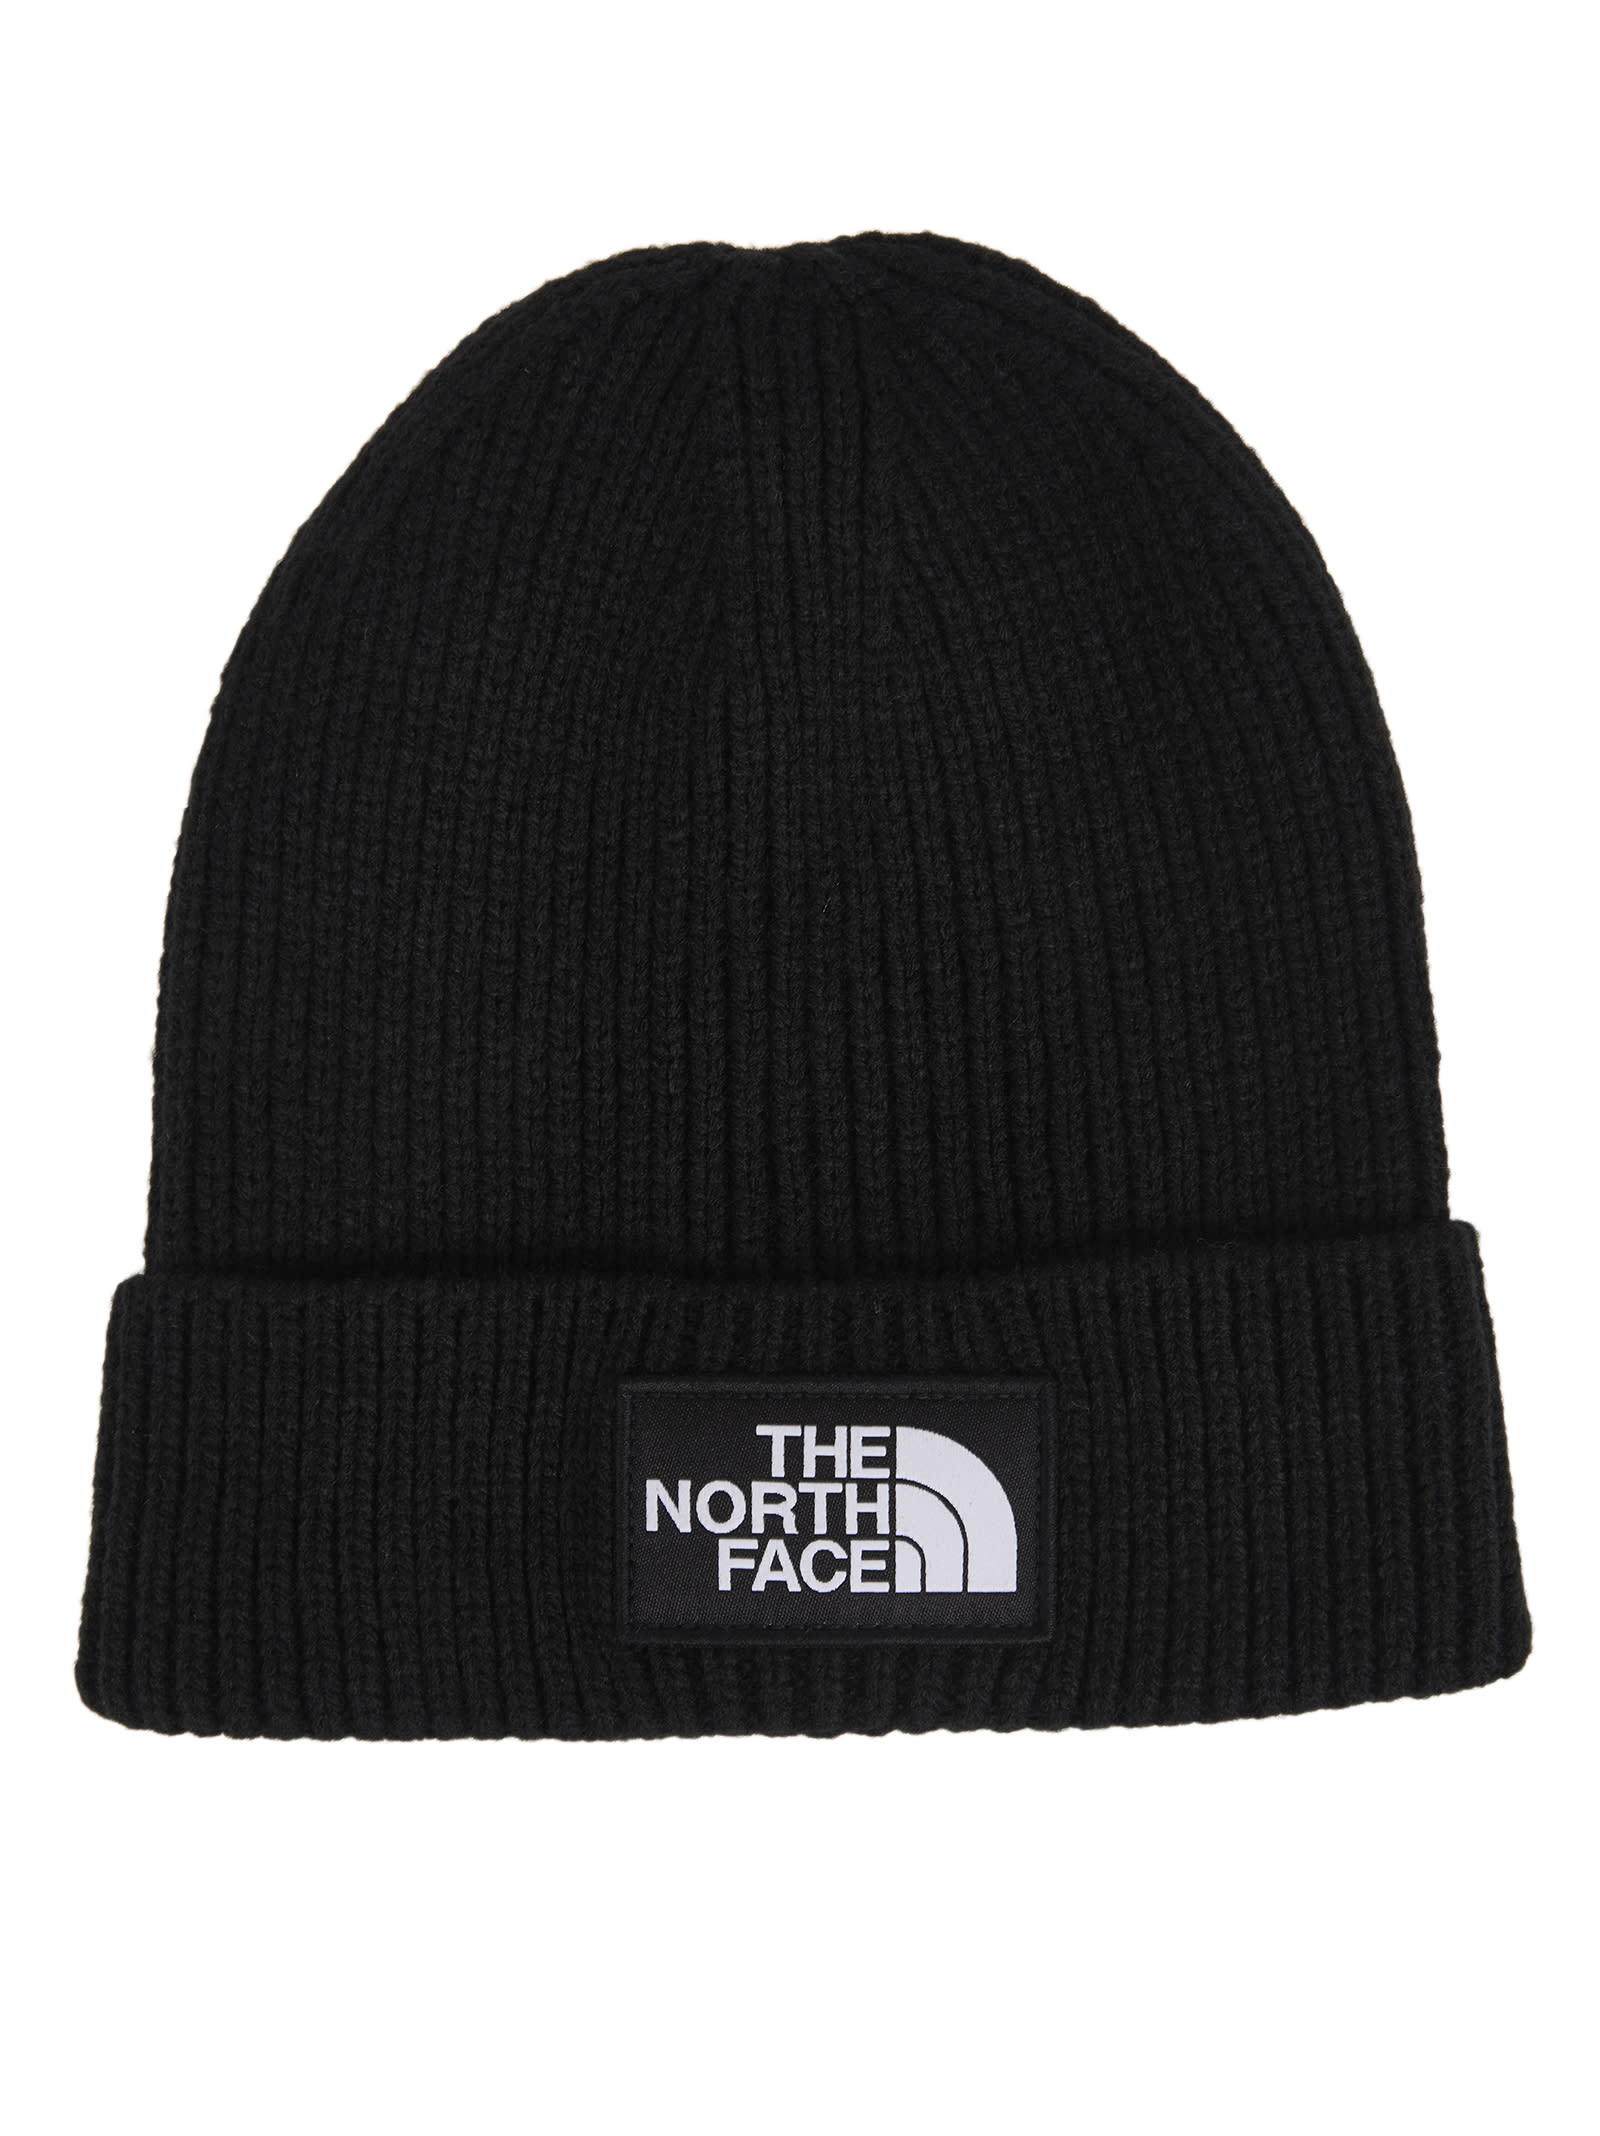 The North Face Balck Hat With Logo